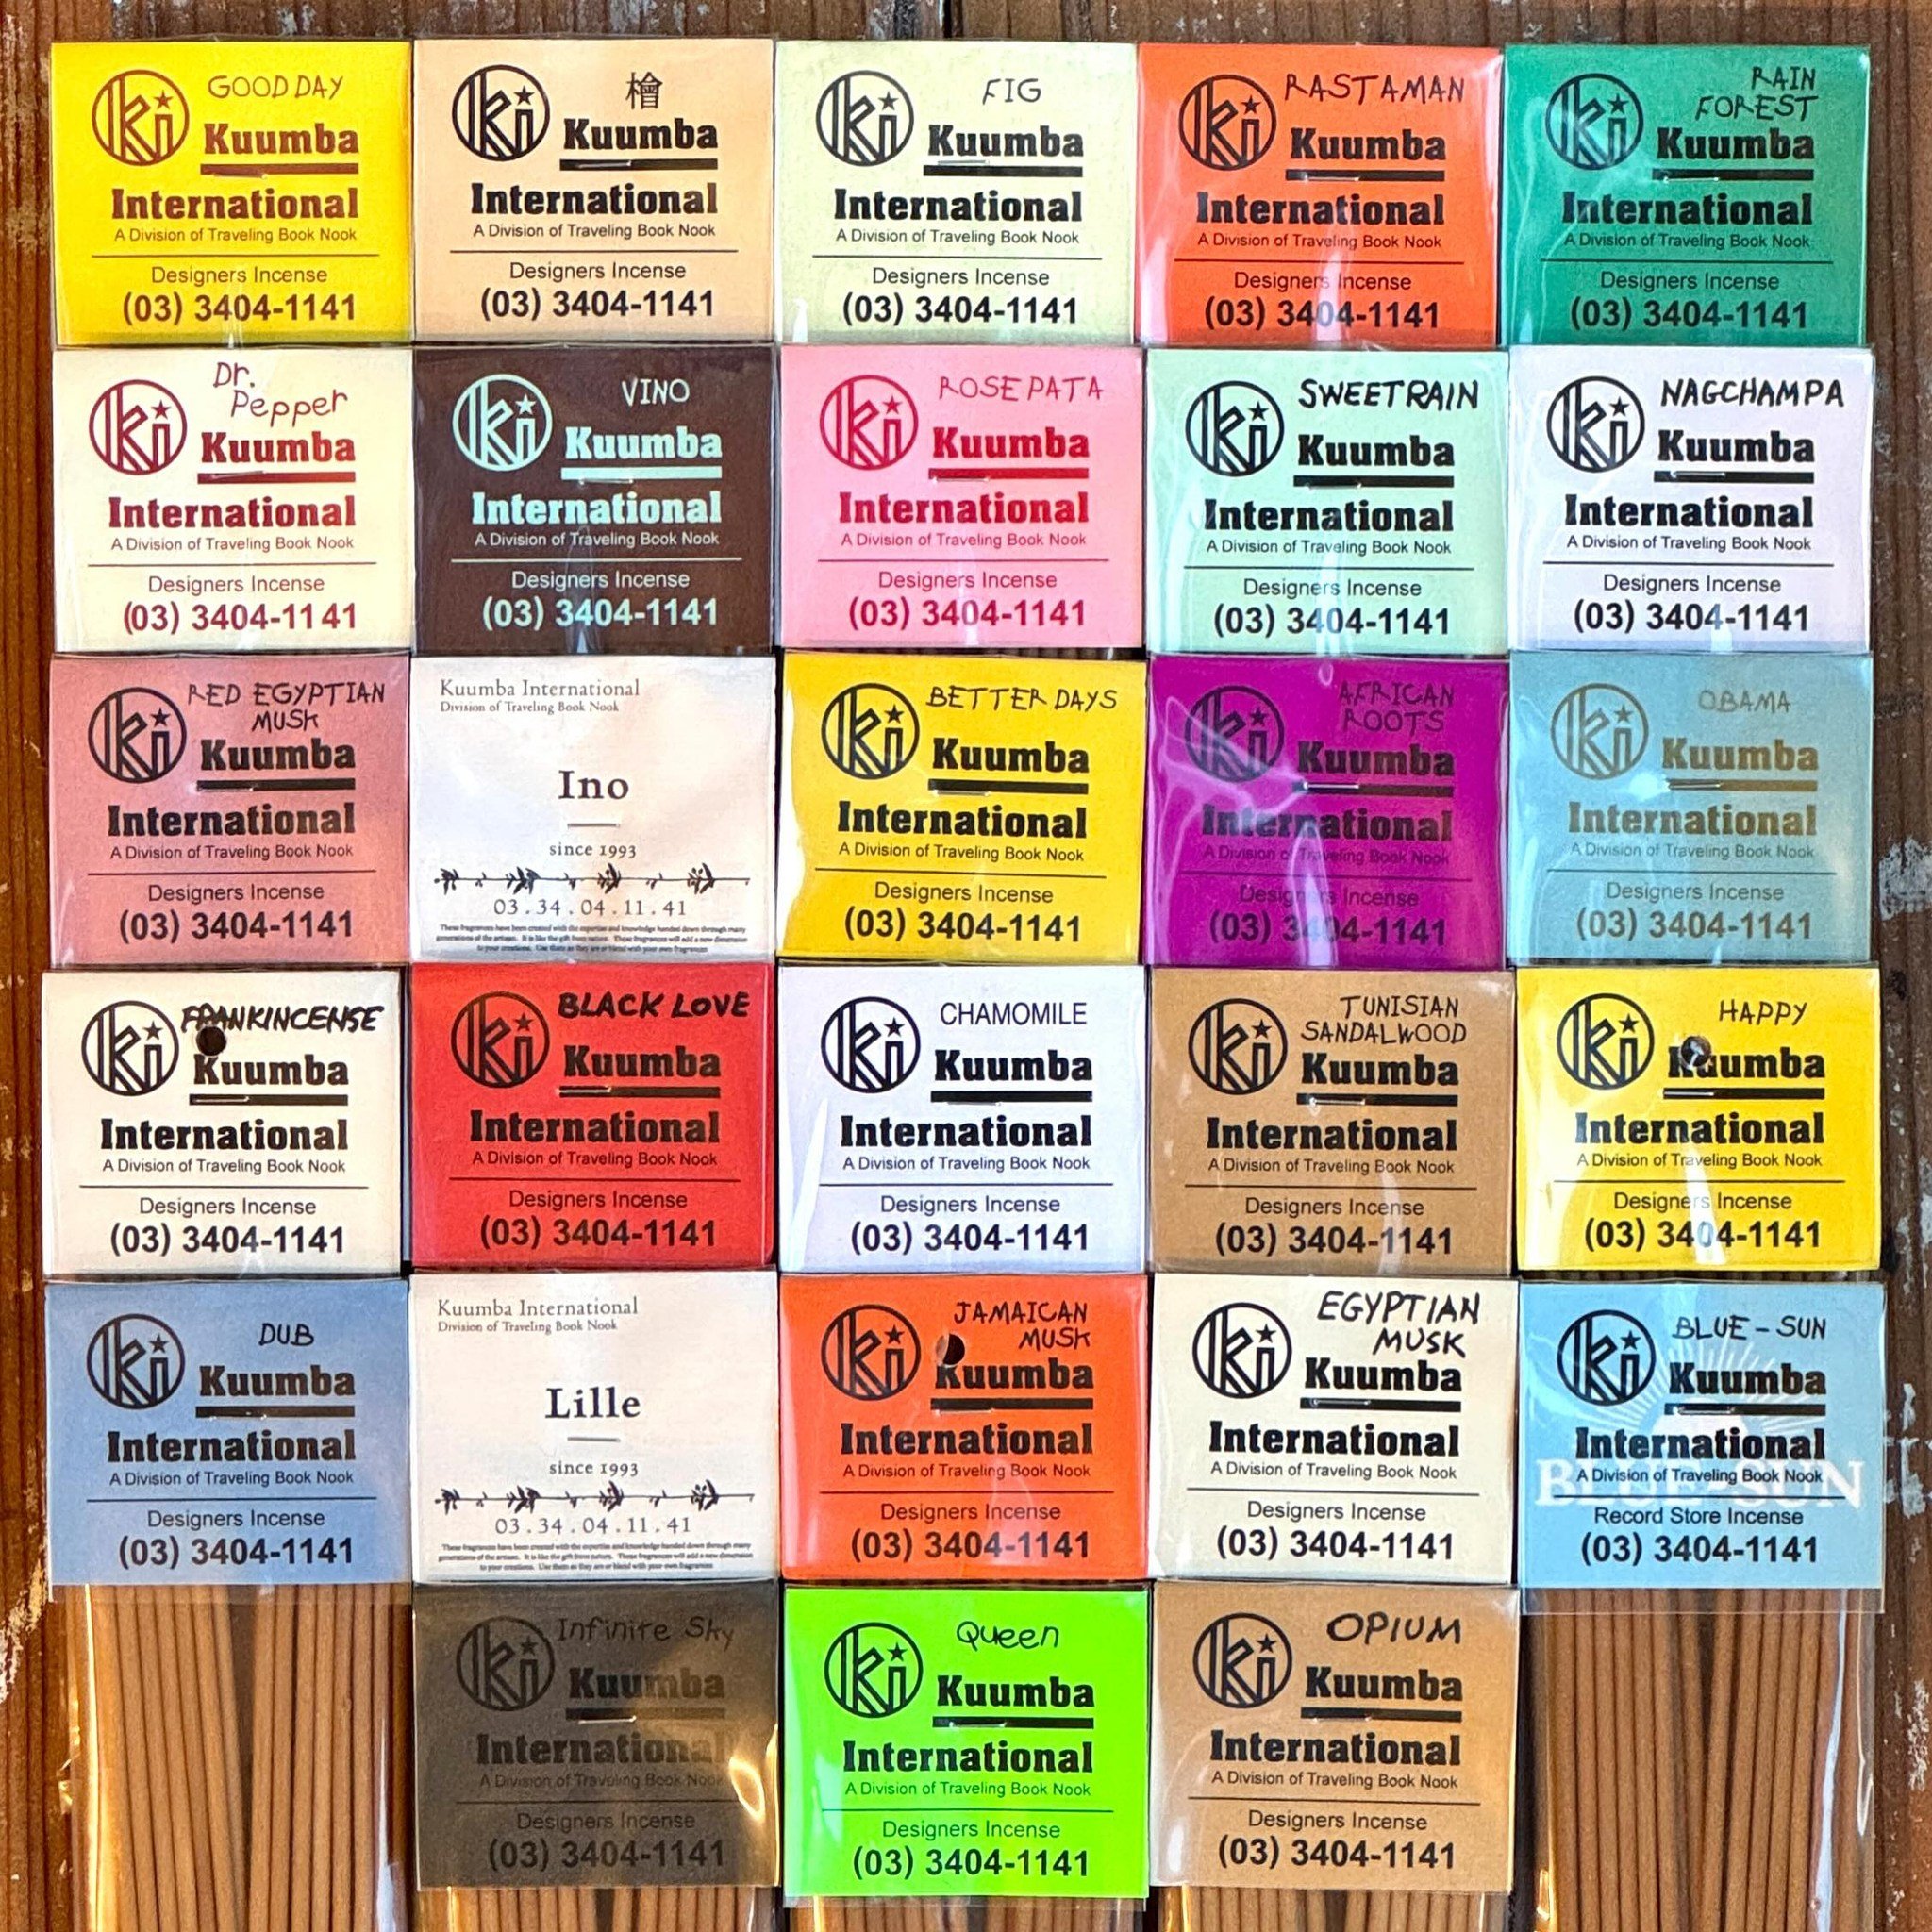 Big Kuumba restock available in-store and online

All the classics back in stock as well as a few new joints

Happy to continue our partnership with Kuumba International and be the sole US stockist for the the best incense one can buy